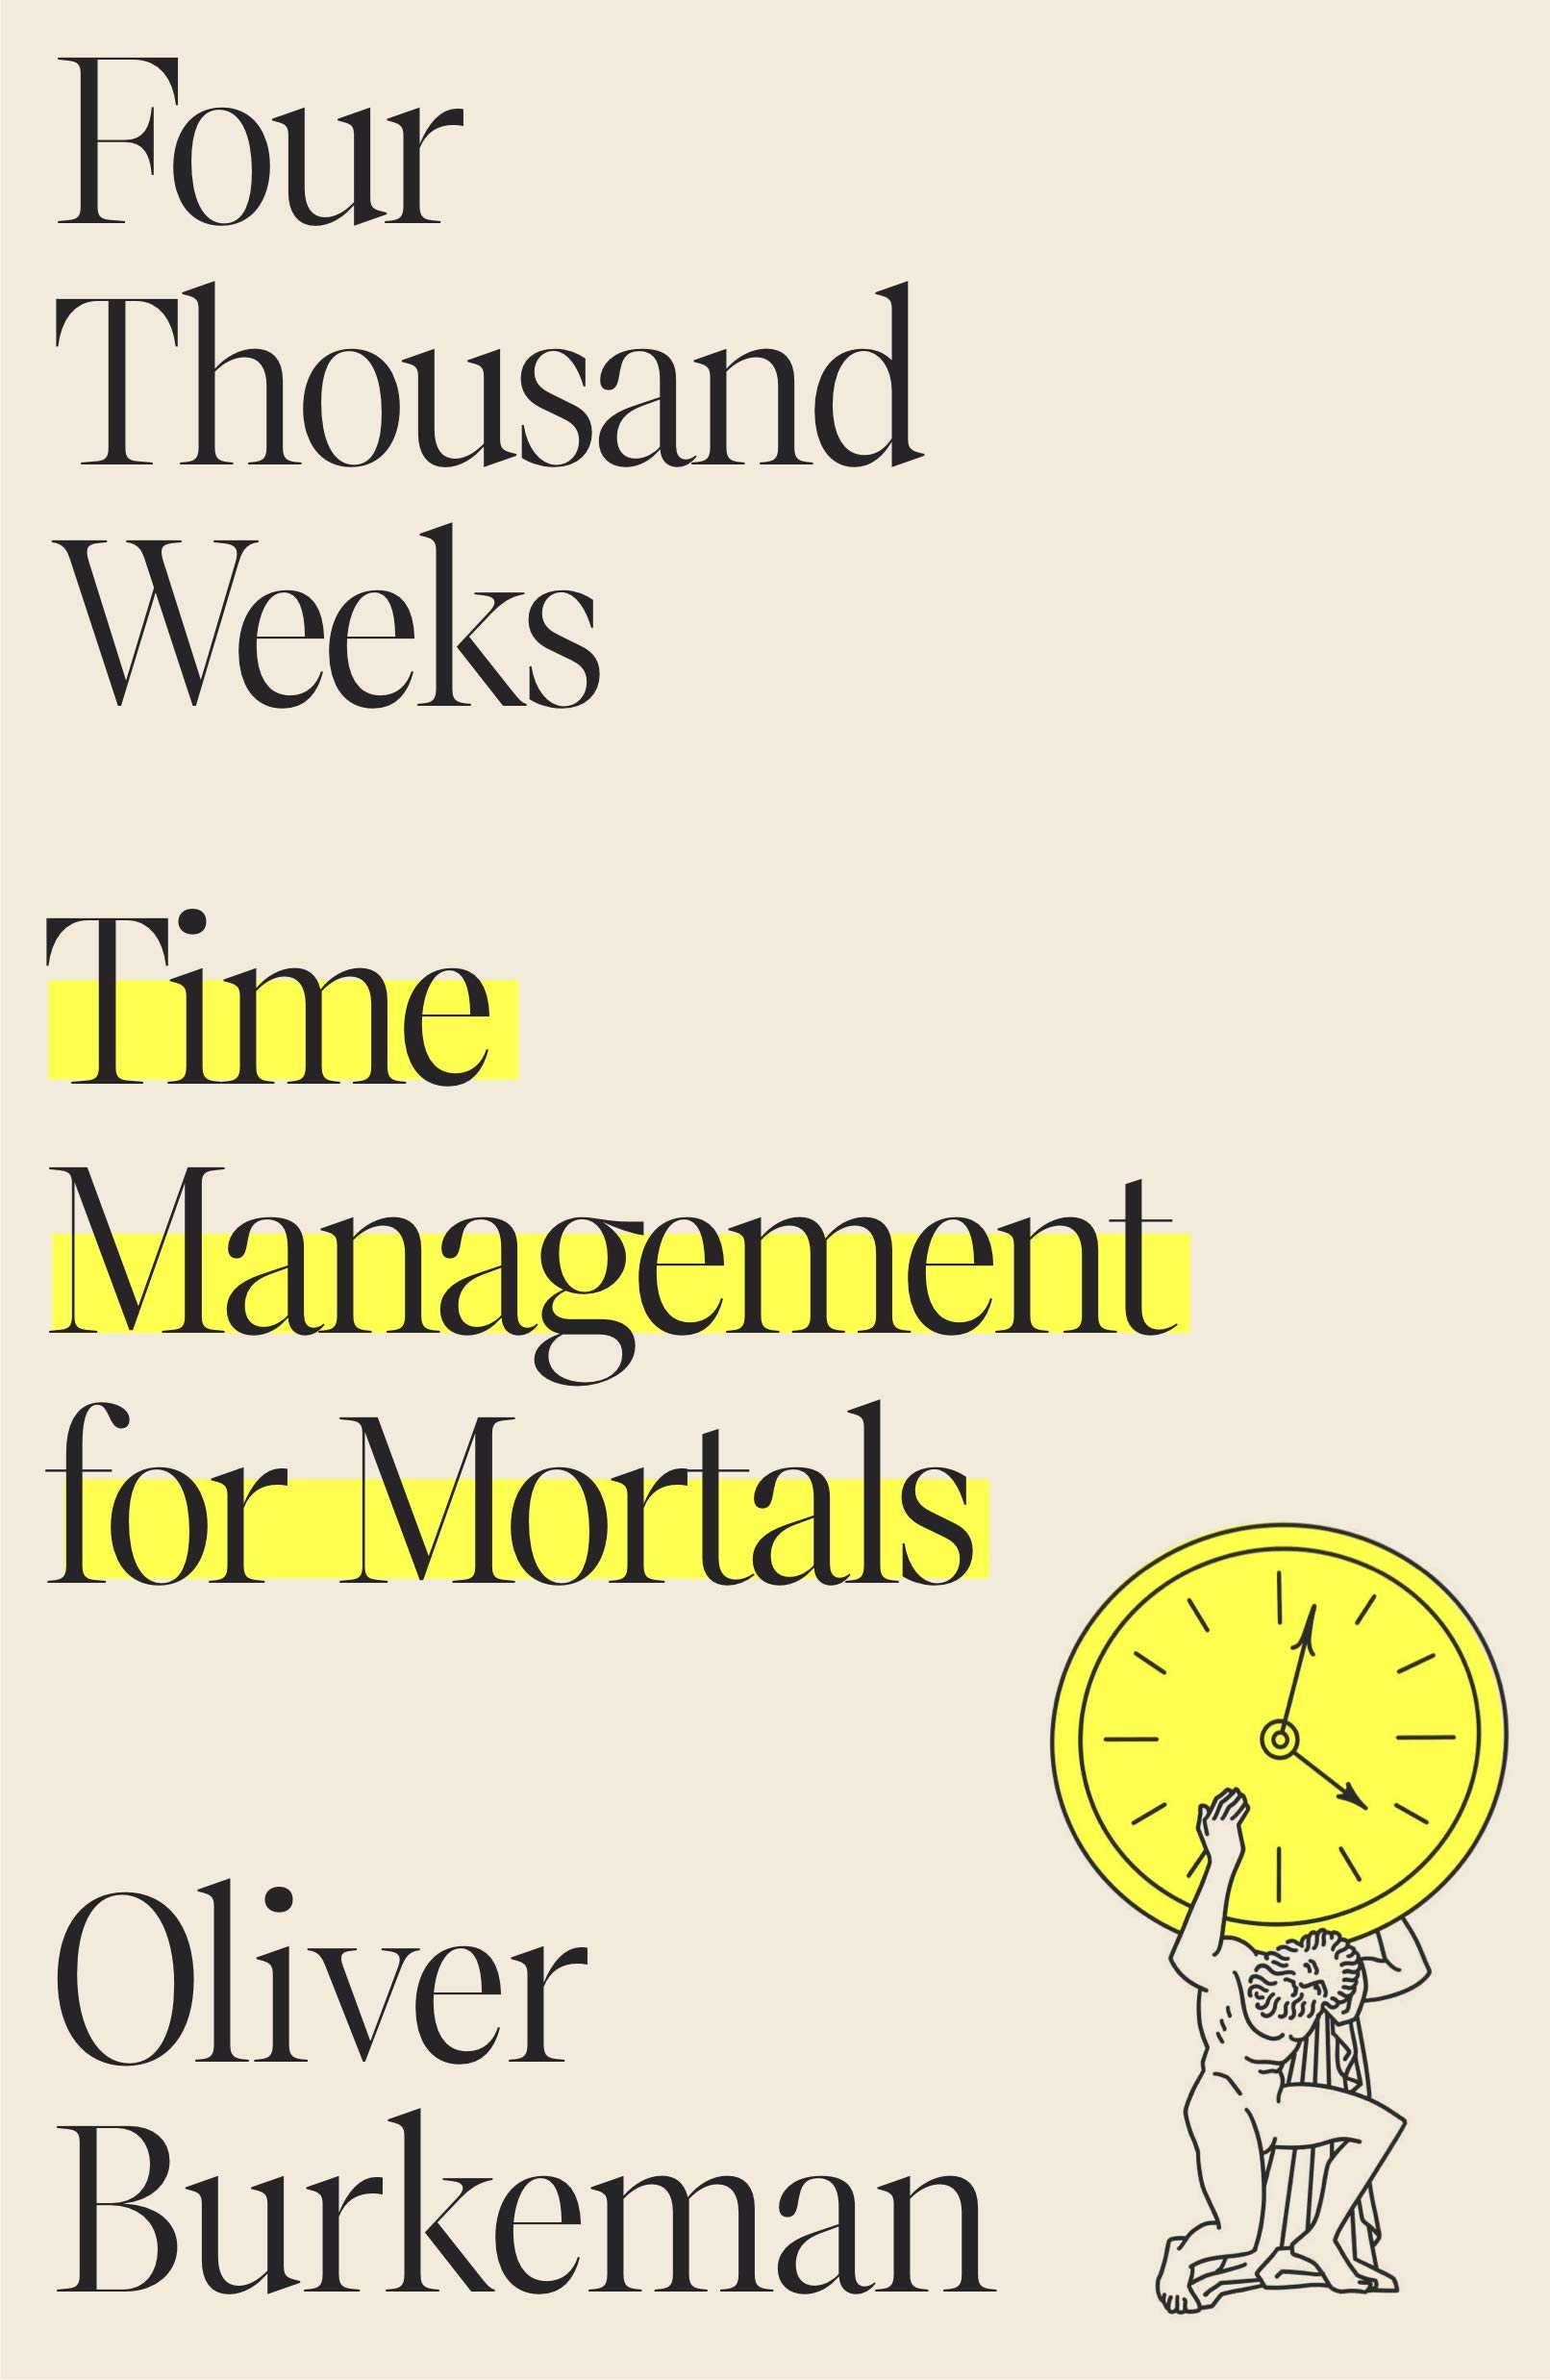 You are currently viewing Four Thousand Weeks: Time Management for Mortals by Oliver Burkeman